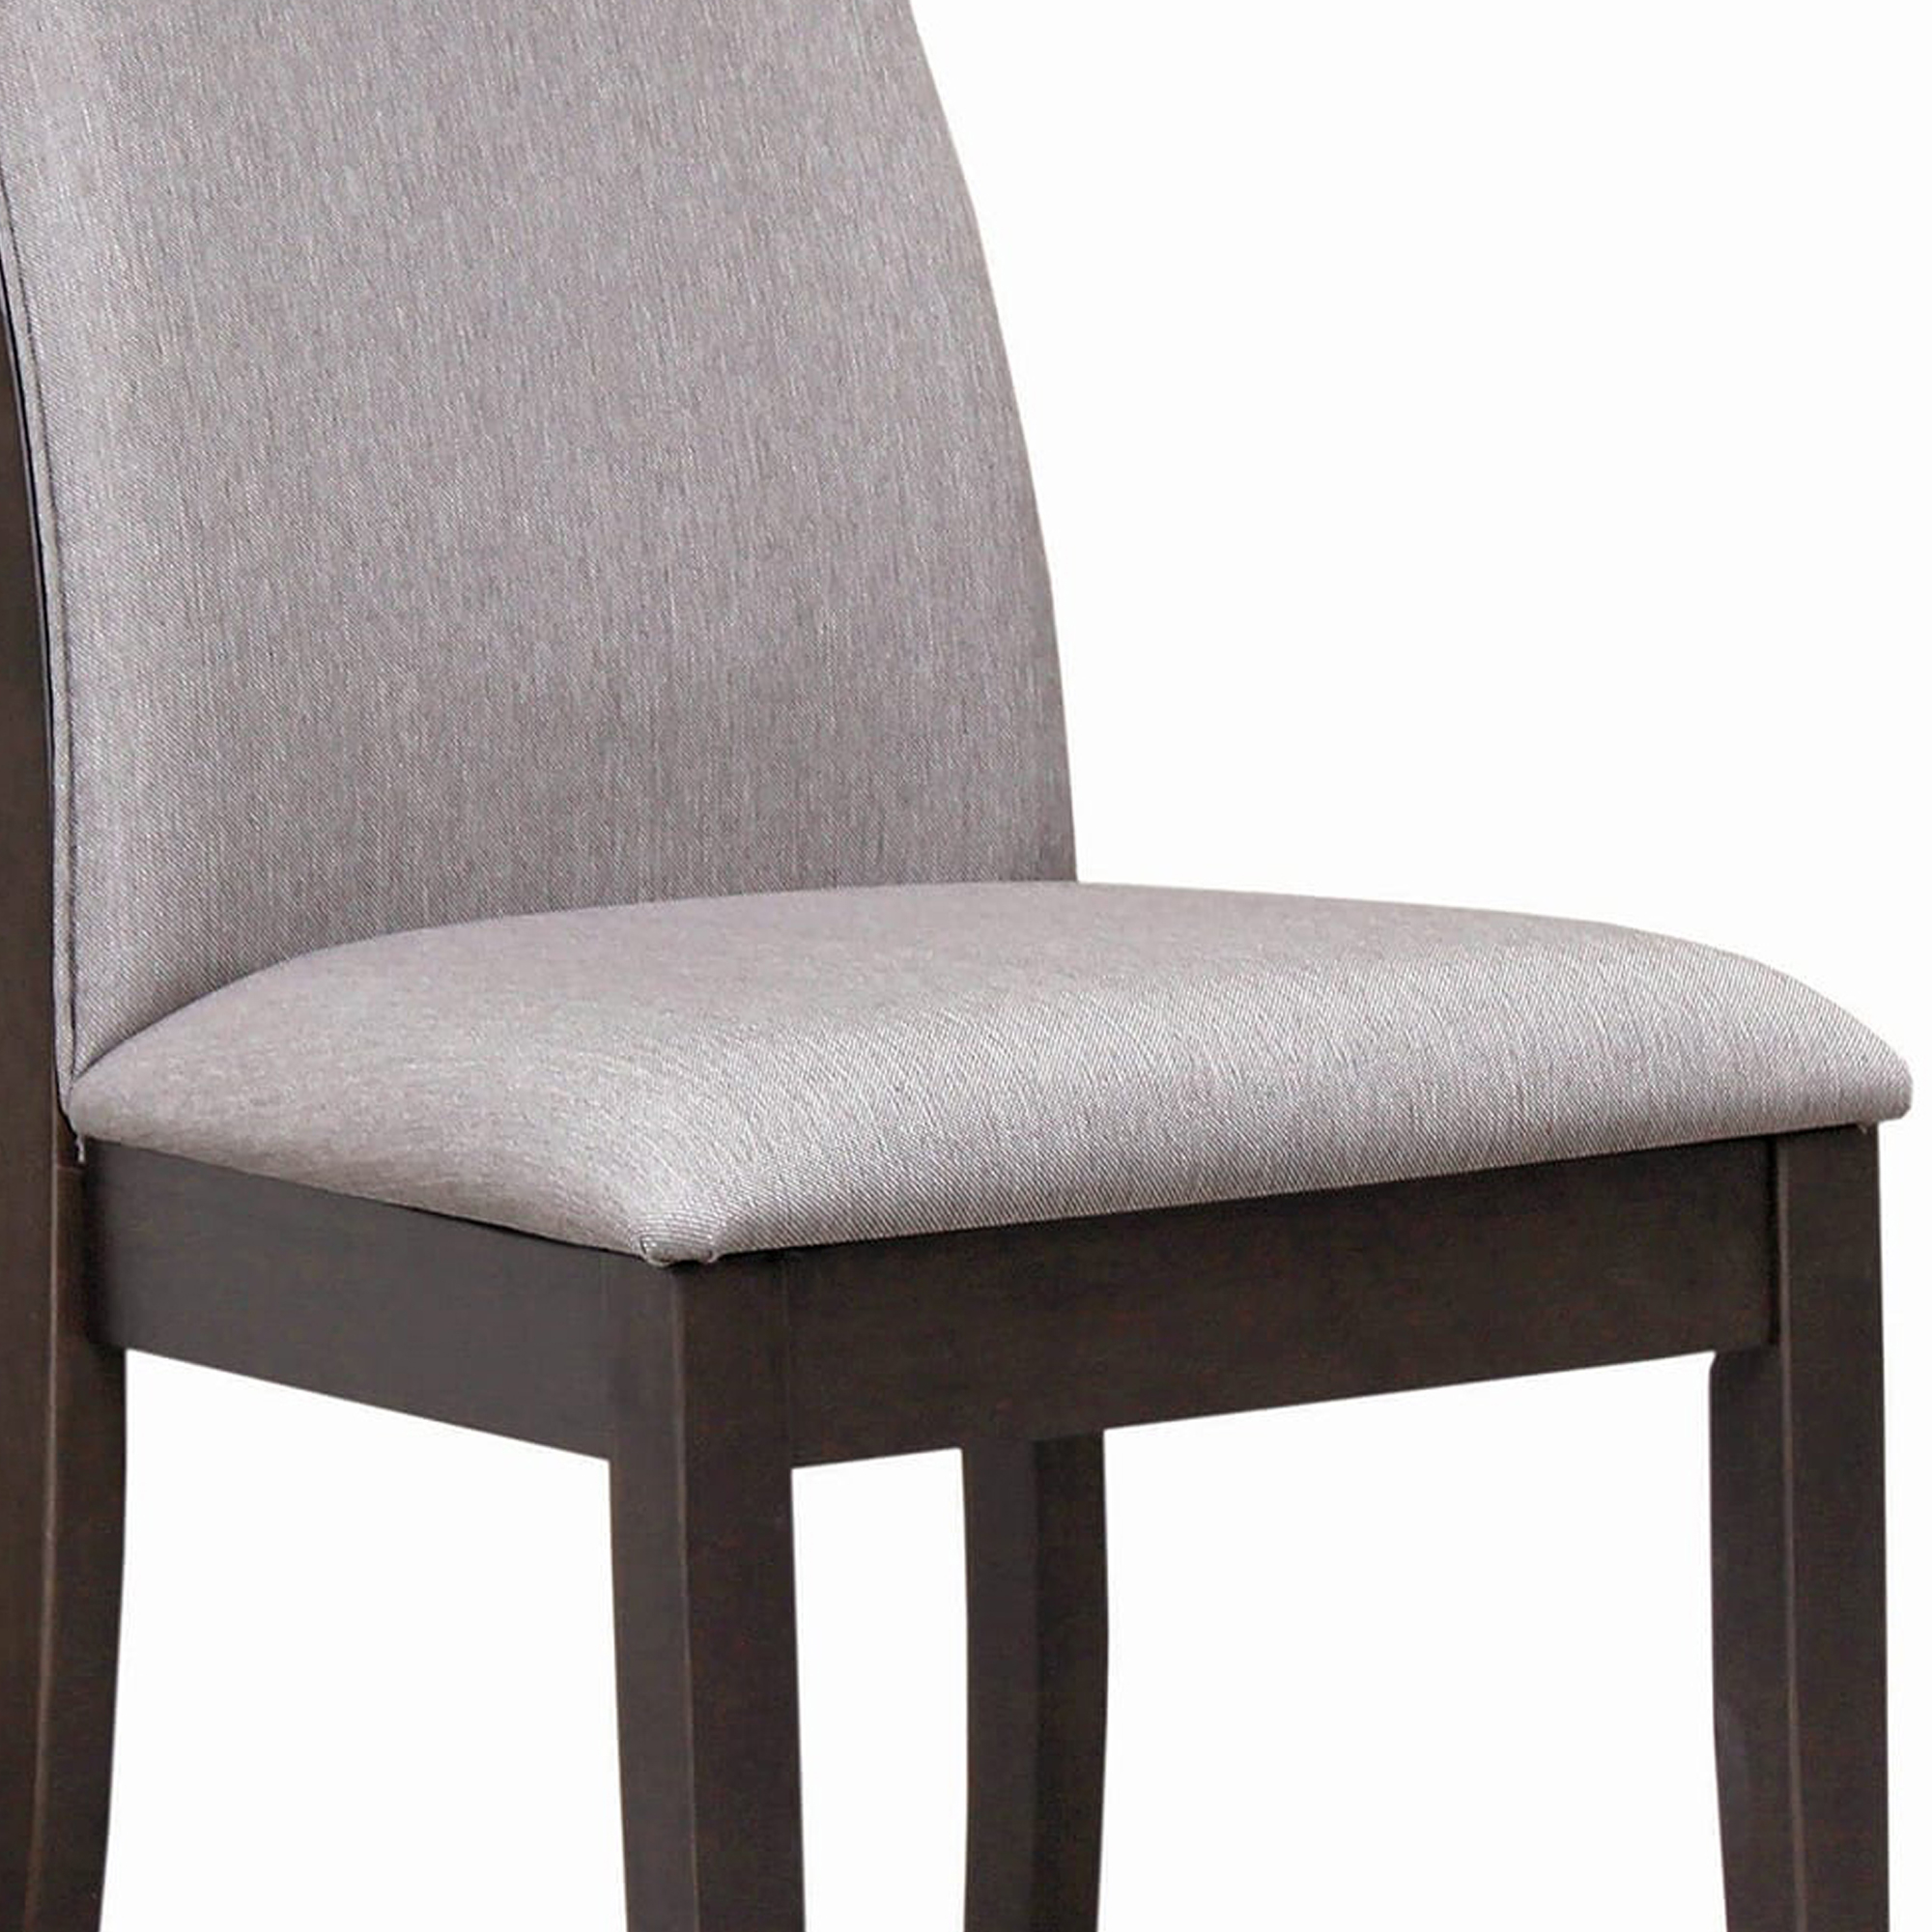 Fabric Upholstered Wooden Dining Chair, Set Of 2, Gray And Brown- Saltoro Sherpi